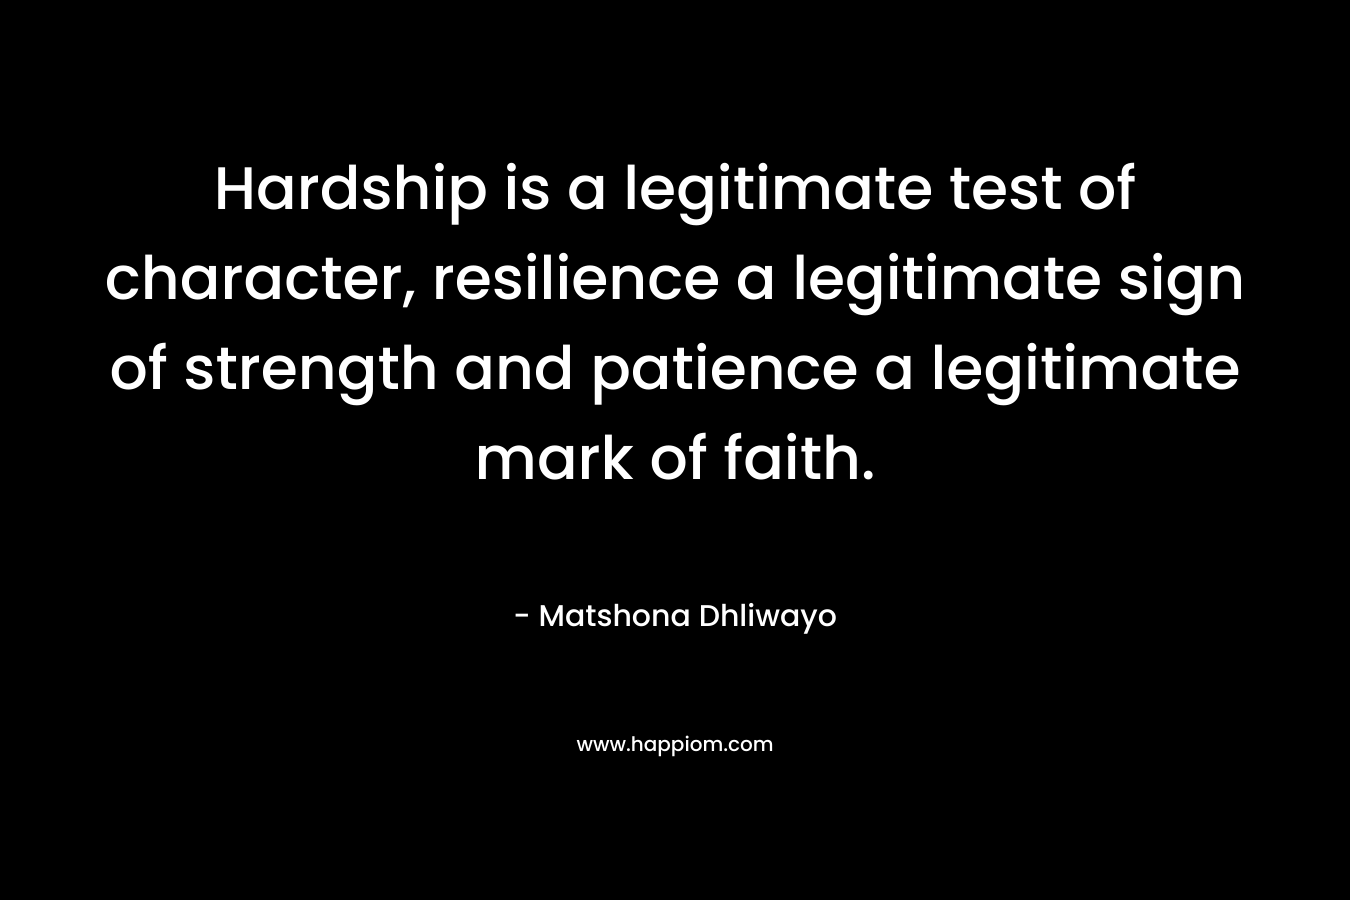 Hardship is a legitimate test of character, resilience a legitimate sign of strength and patience a legitimate mark of faith.